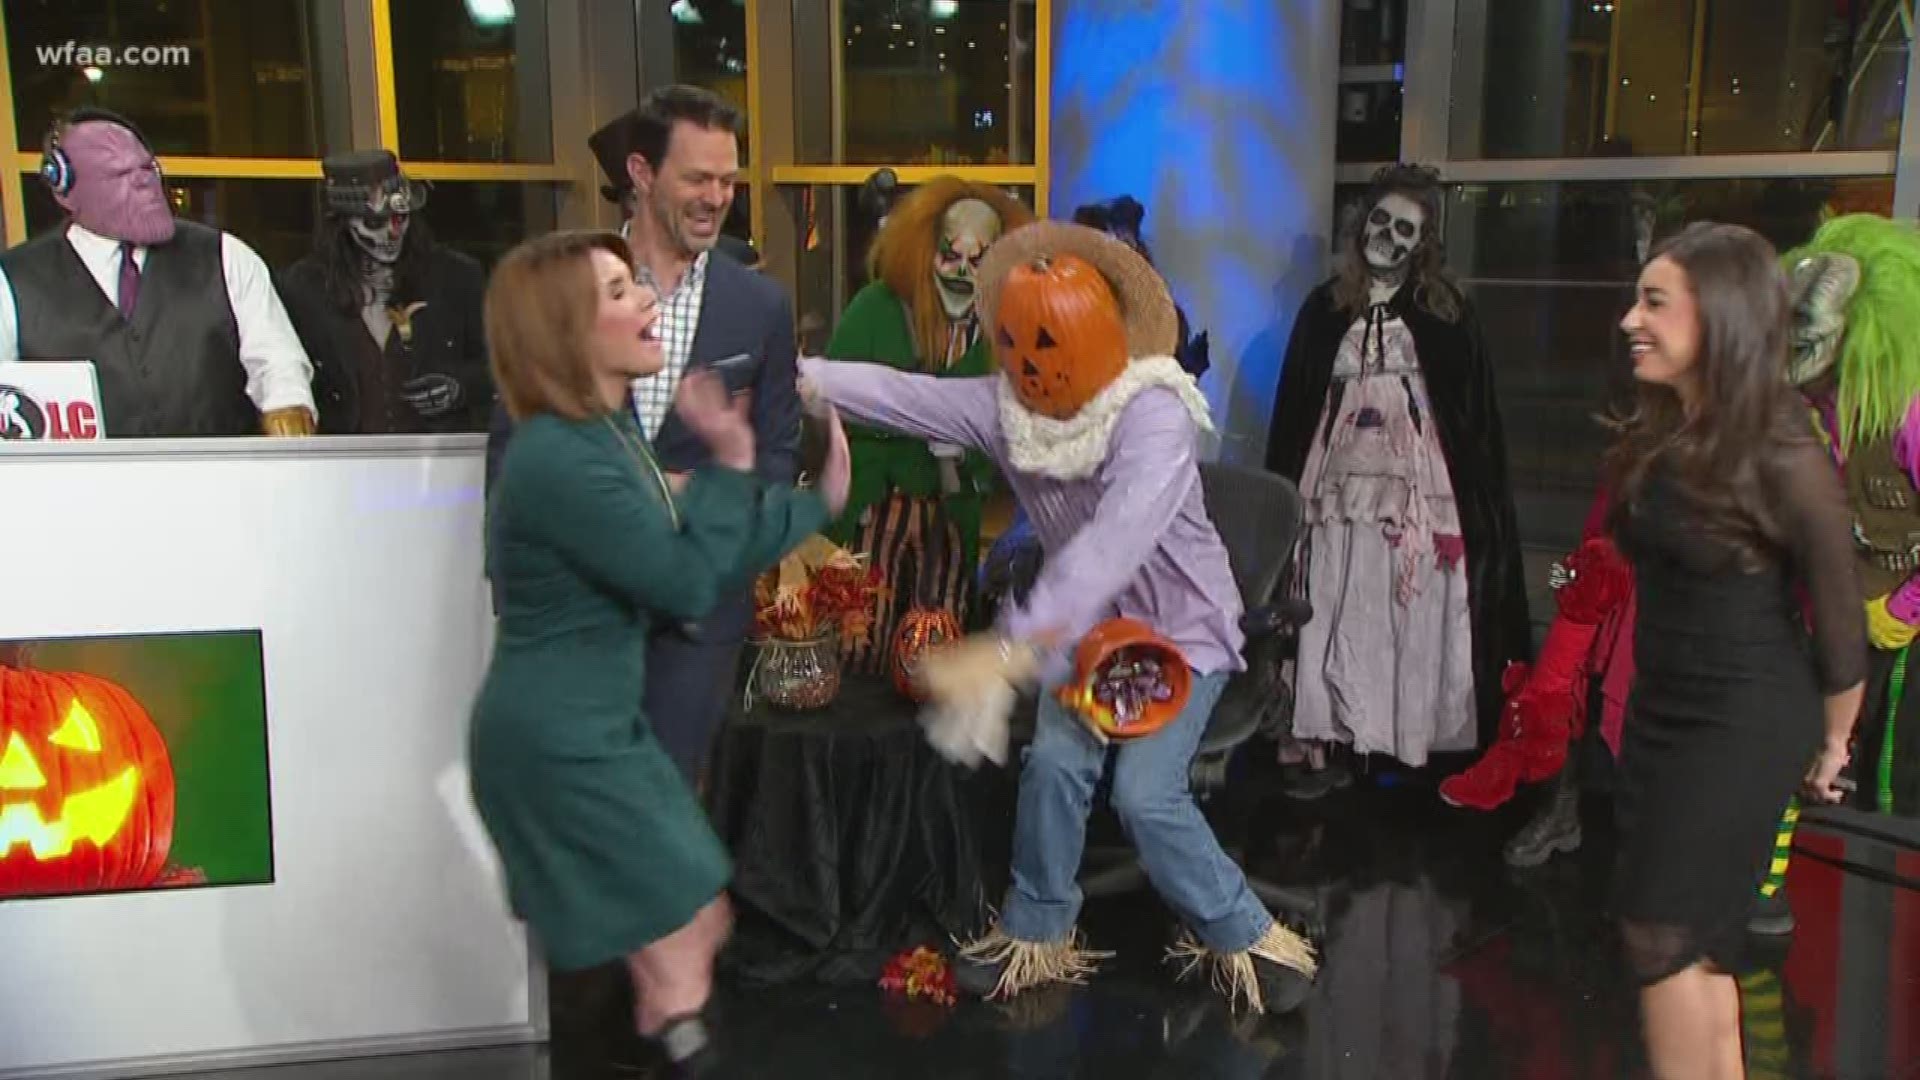 Sean Giggy and the rest of the Daybreak crew got 'em good this Halloween.